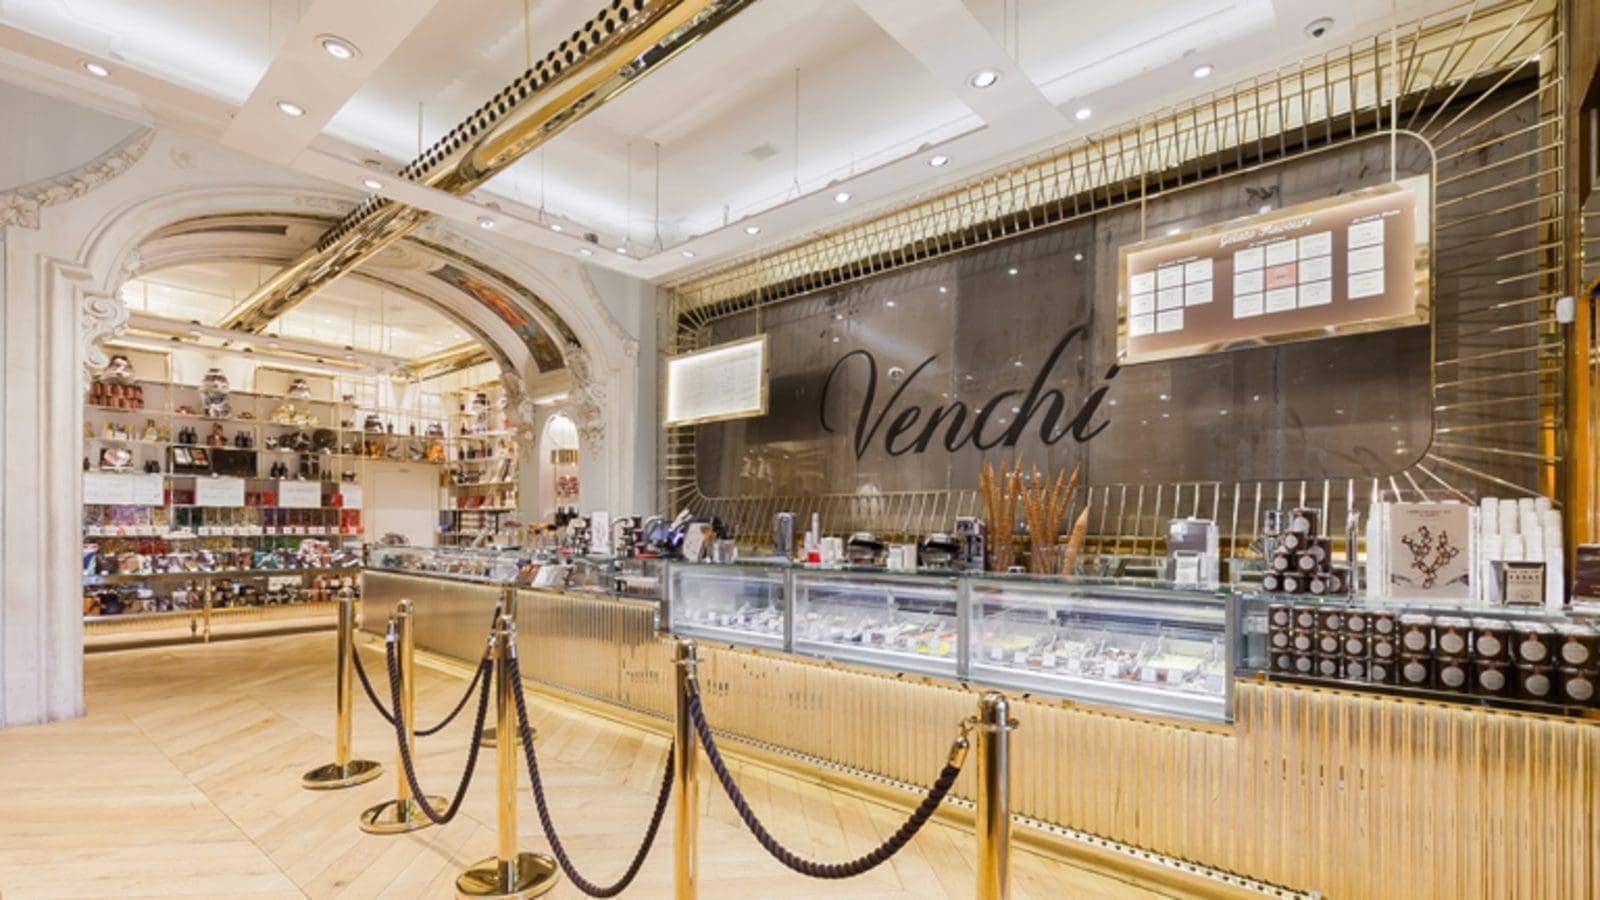 Venchi opens new flagship store in London